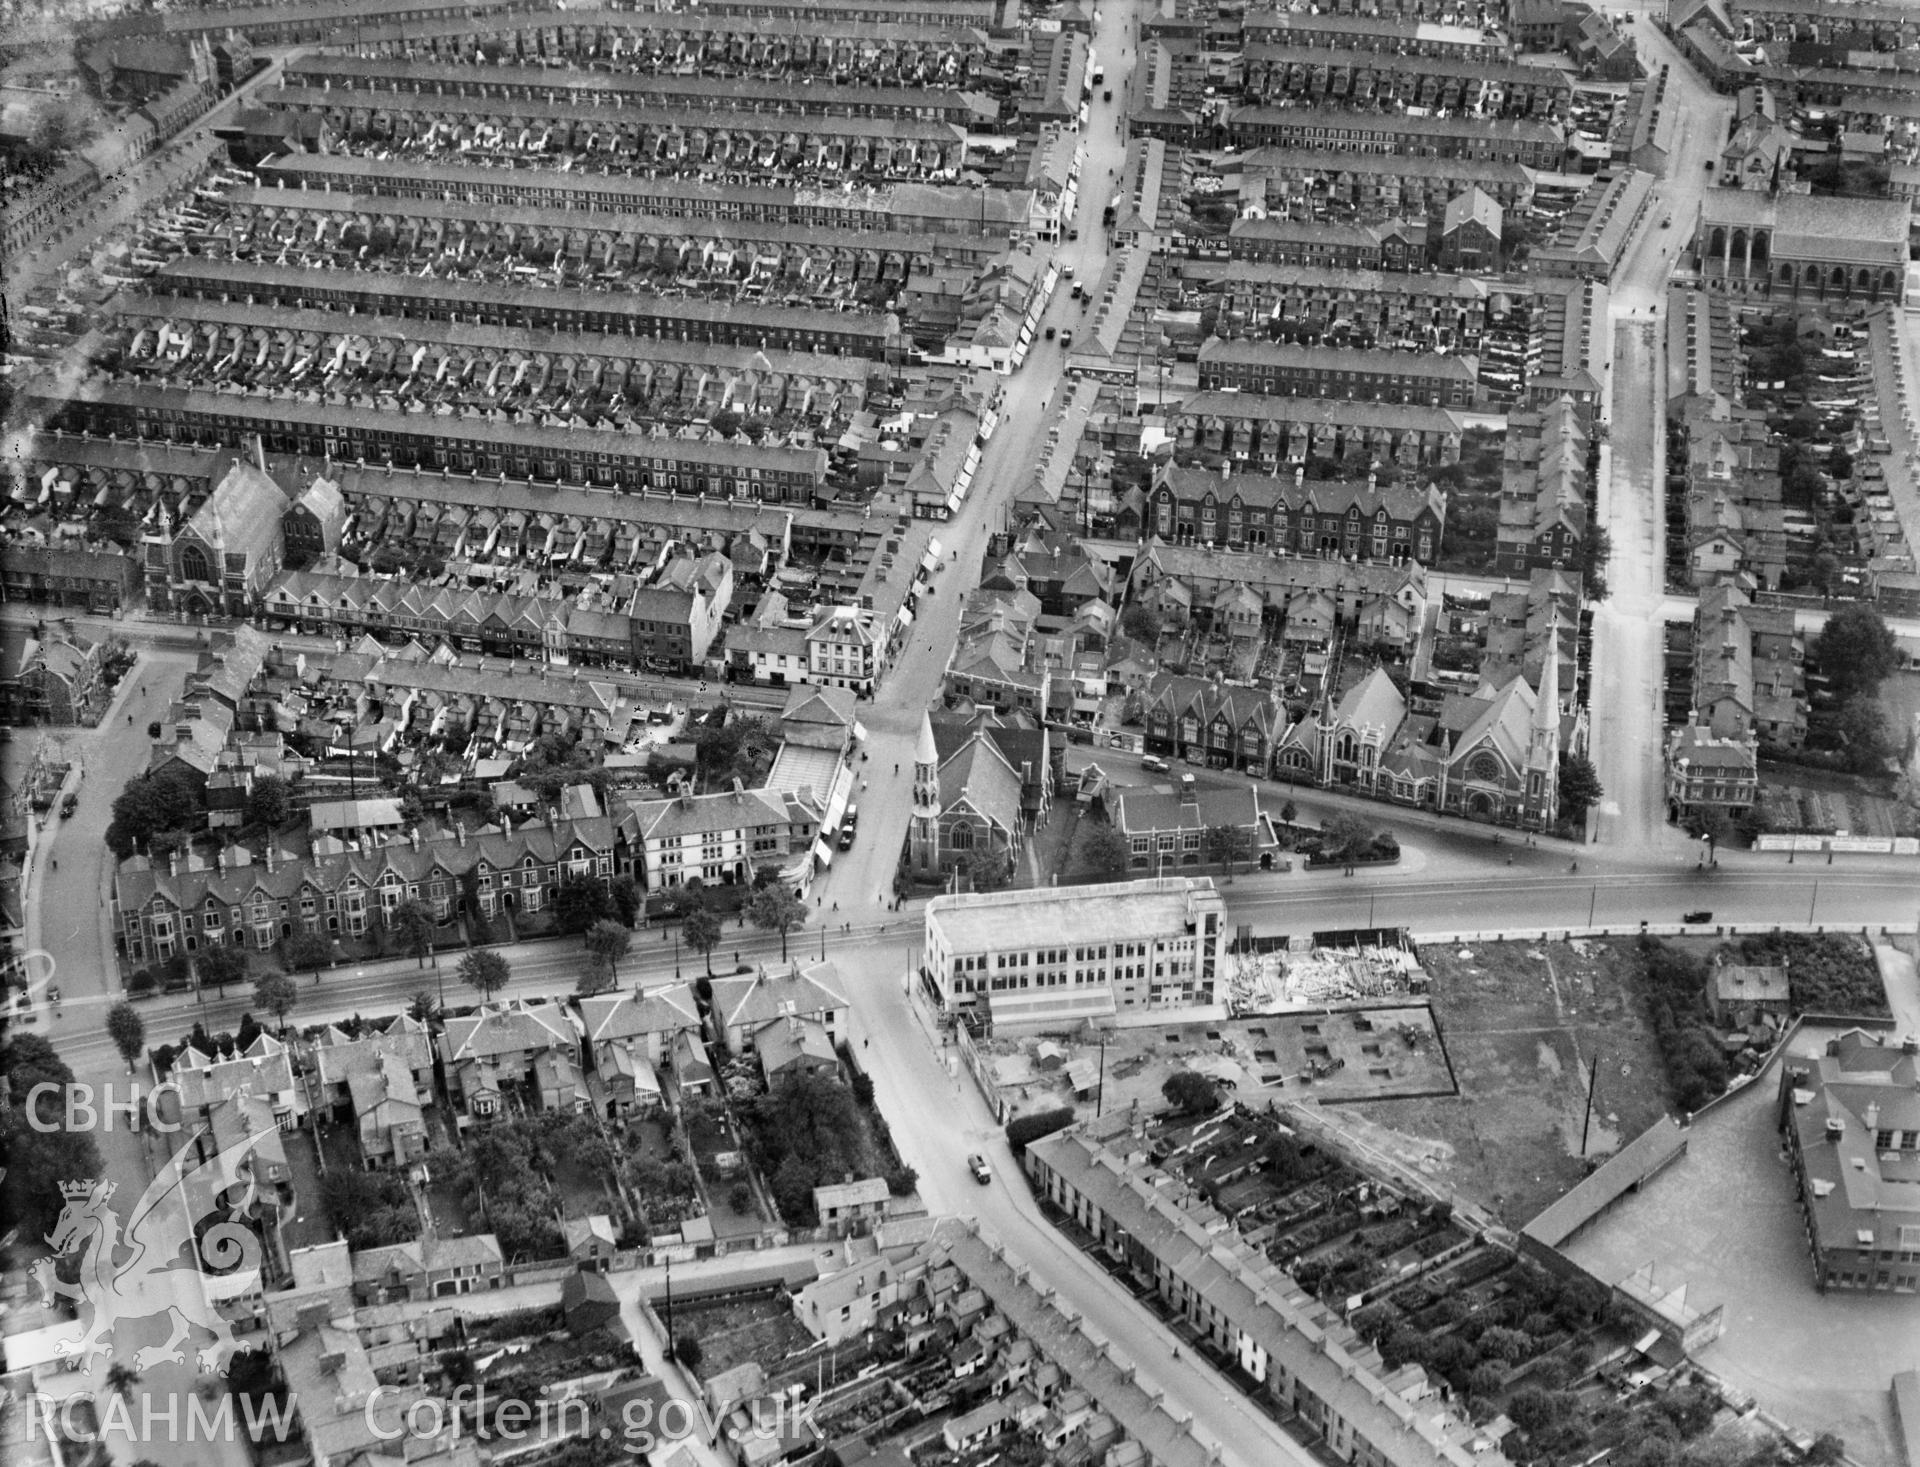 General view of Cardiff, residential areas, oblique aerial view. 5?x4? black and white glass plate negative.